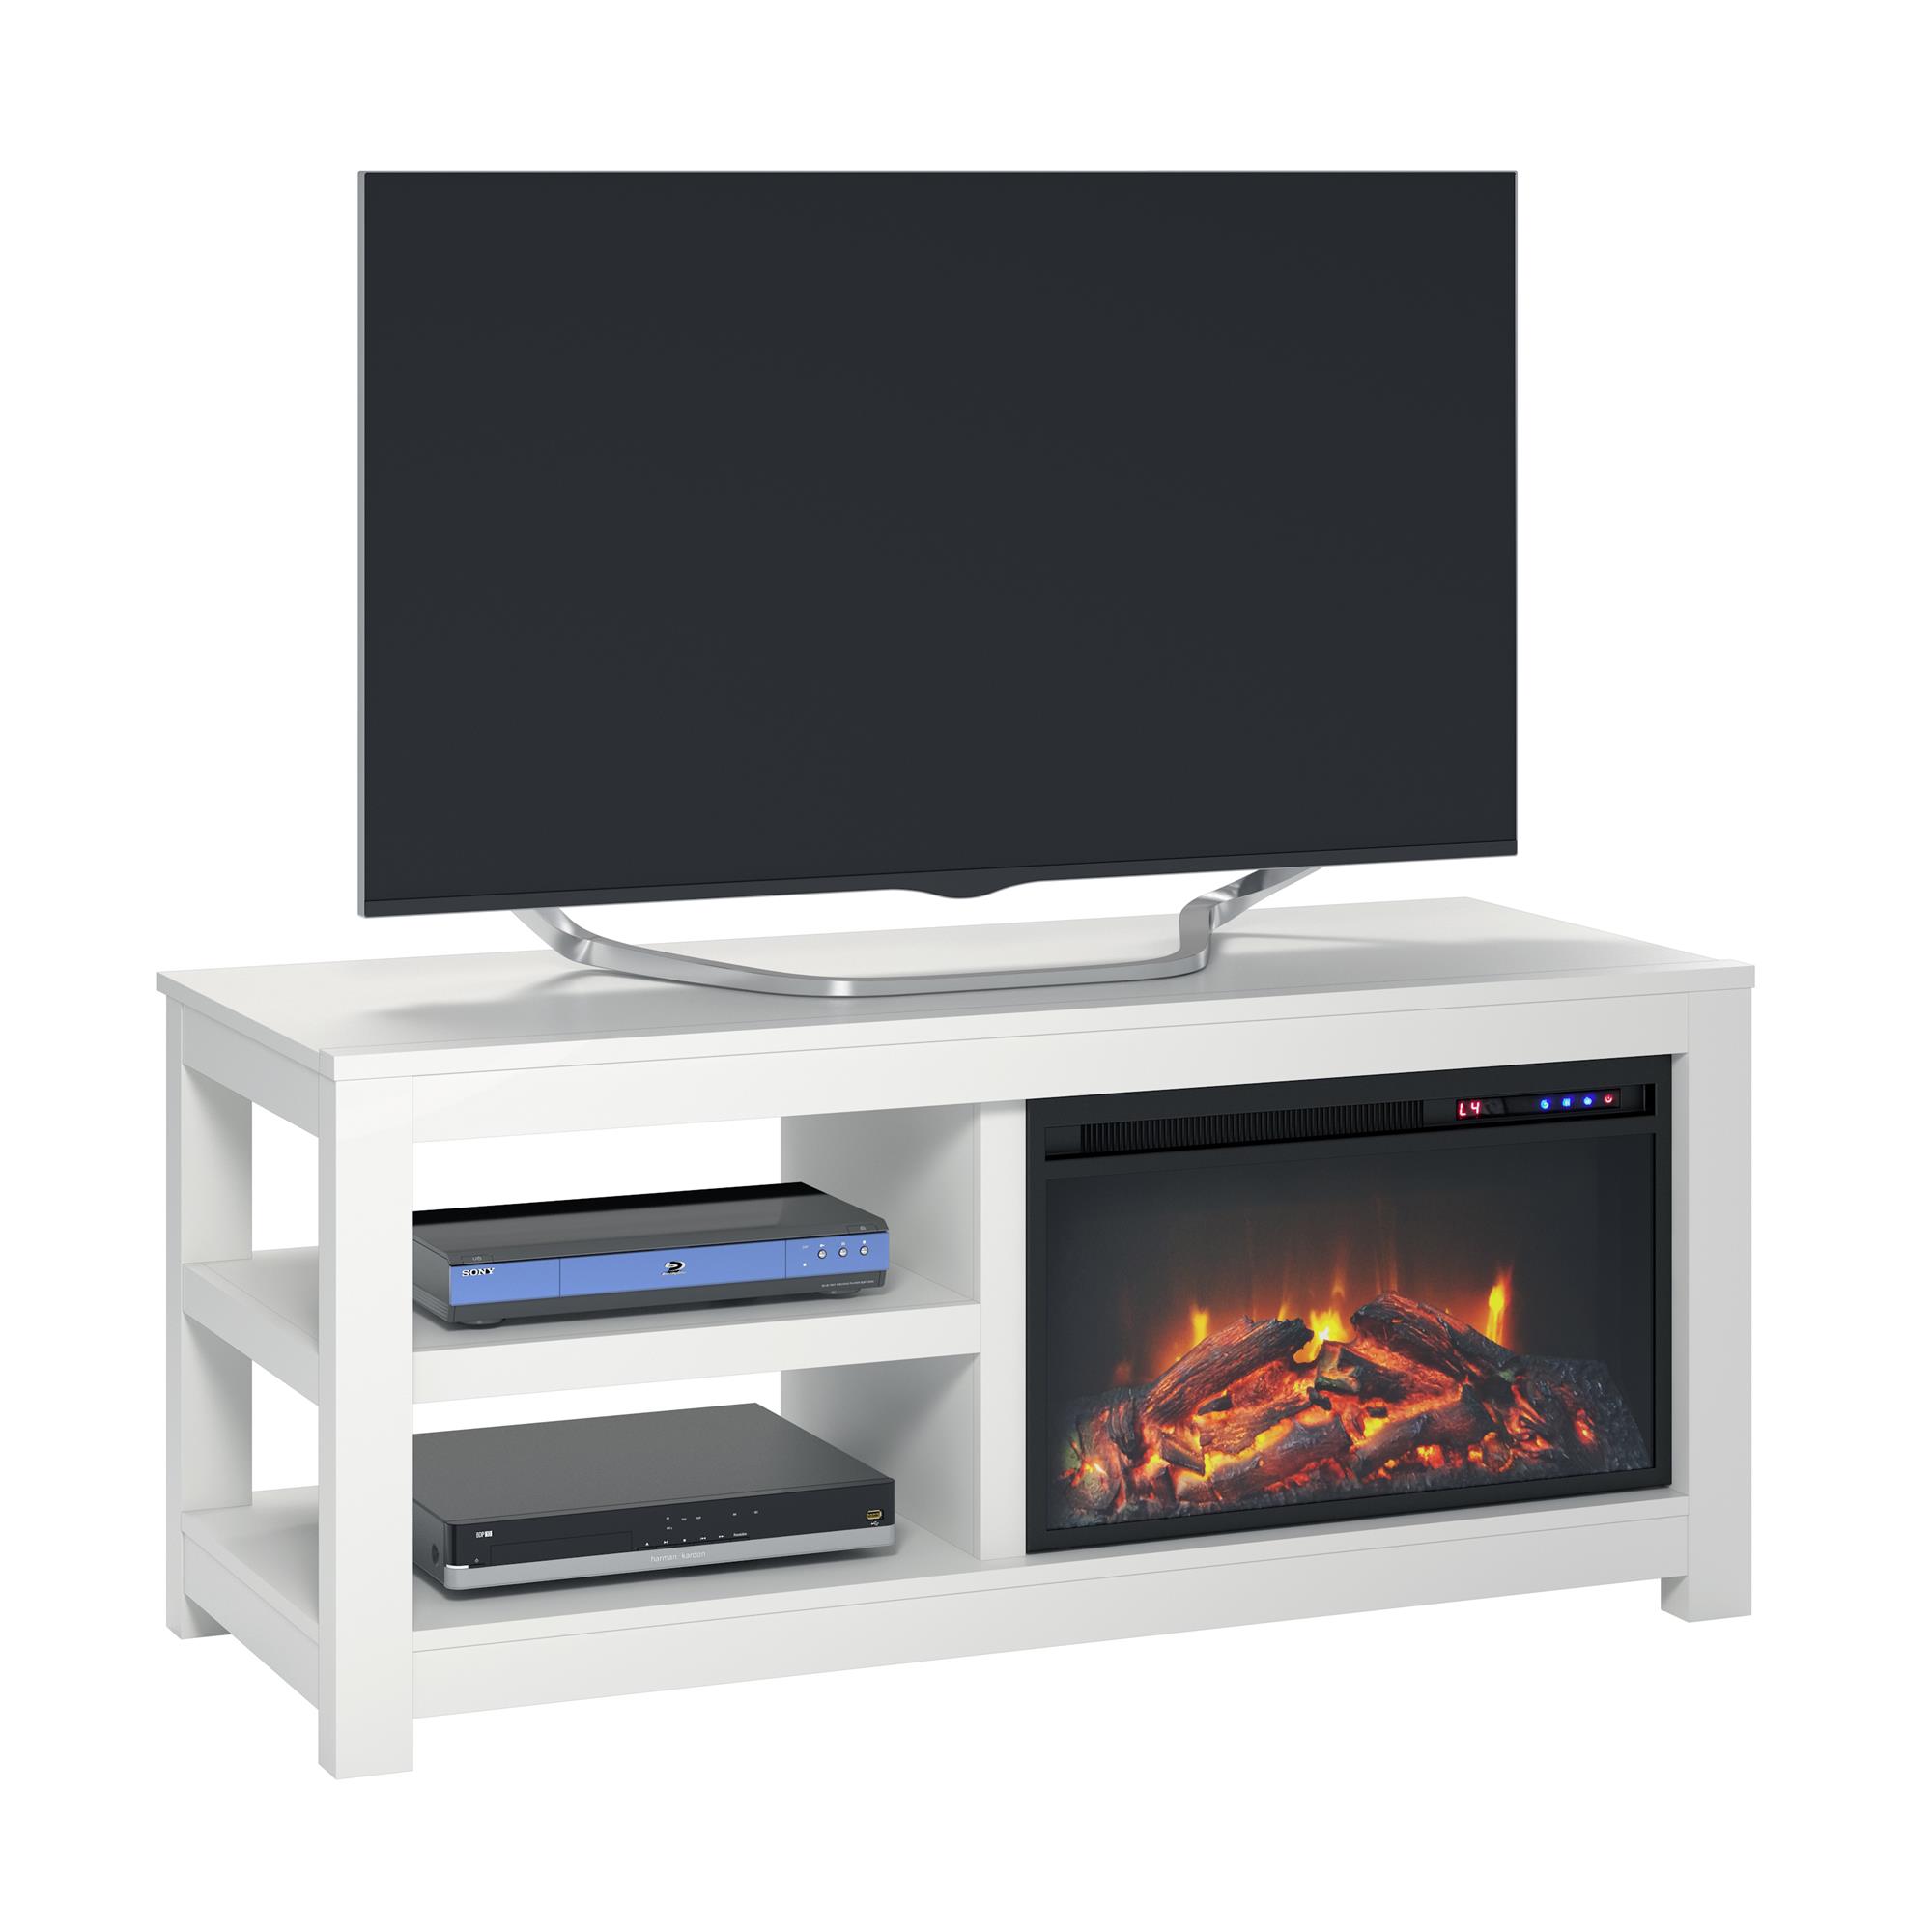 Ameriwood Home Glyndon Electric Fireplace TV Stand for TVs up to 55" White - image 1 of 7